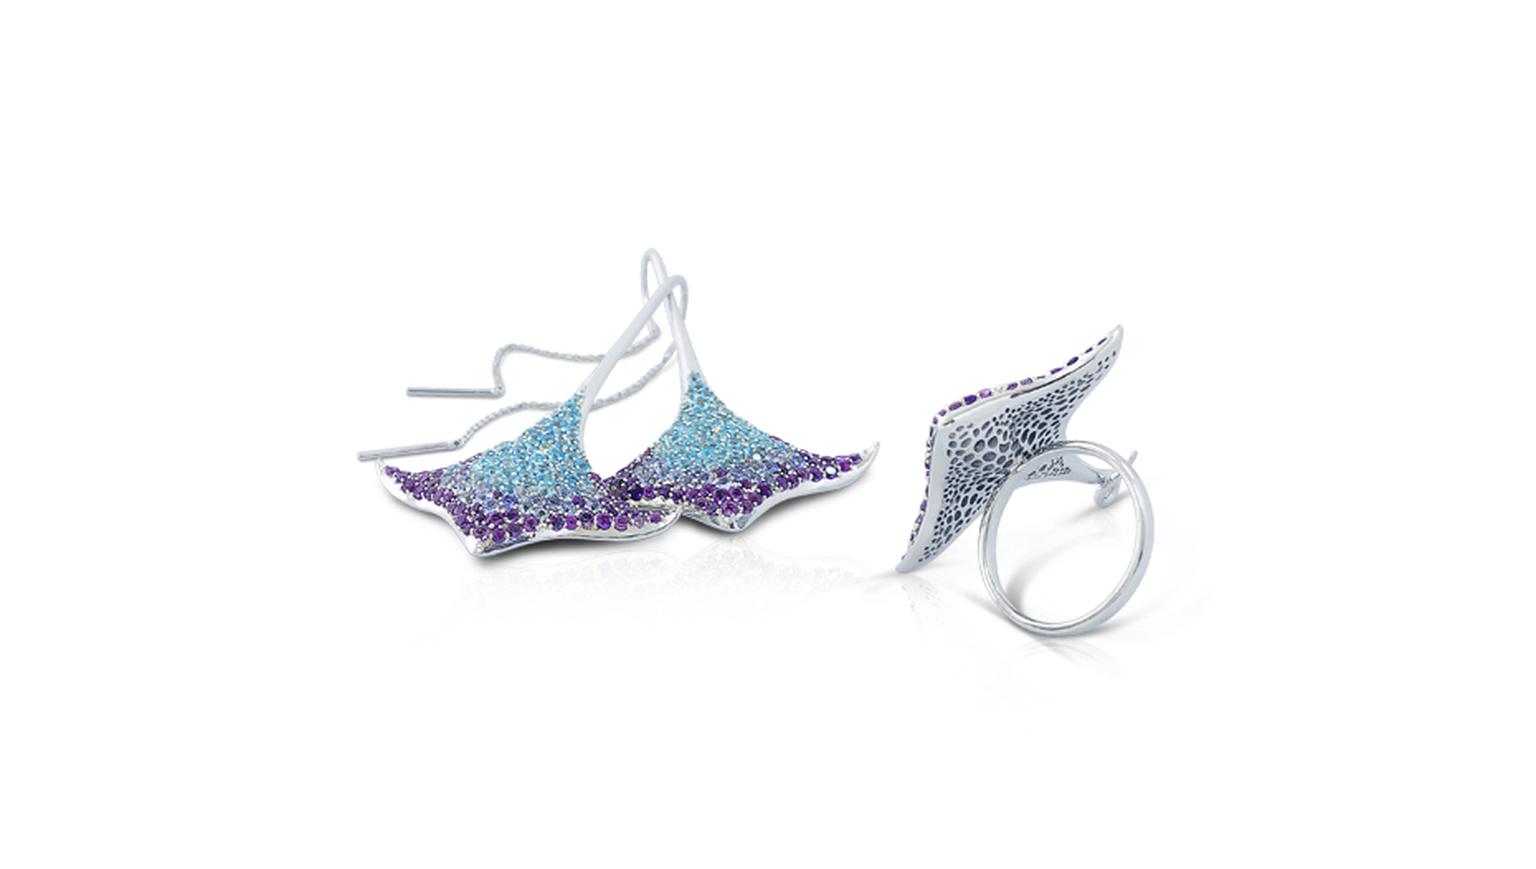 Phioro jewellery Aquaray earrings and ring with topaz, tanzanite and amethyst in white gold.